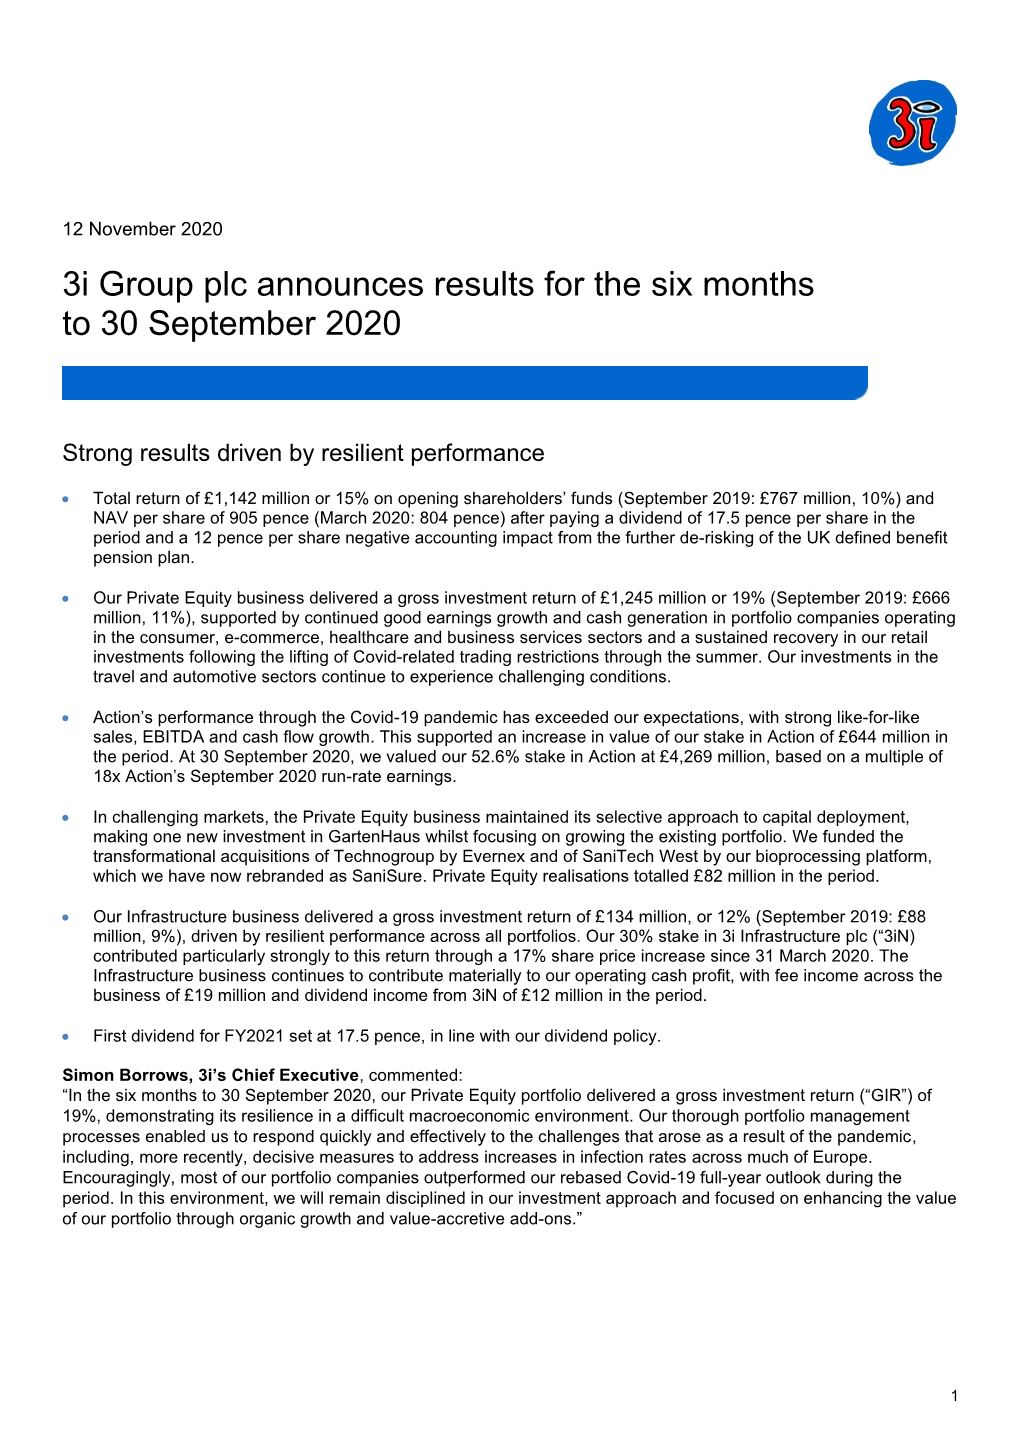 3I Group Plc Announces Results for the Six Months to 30 September 2020